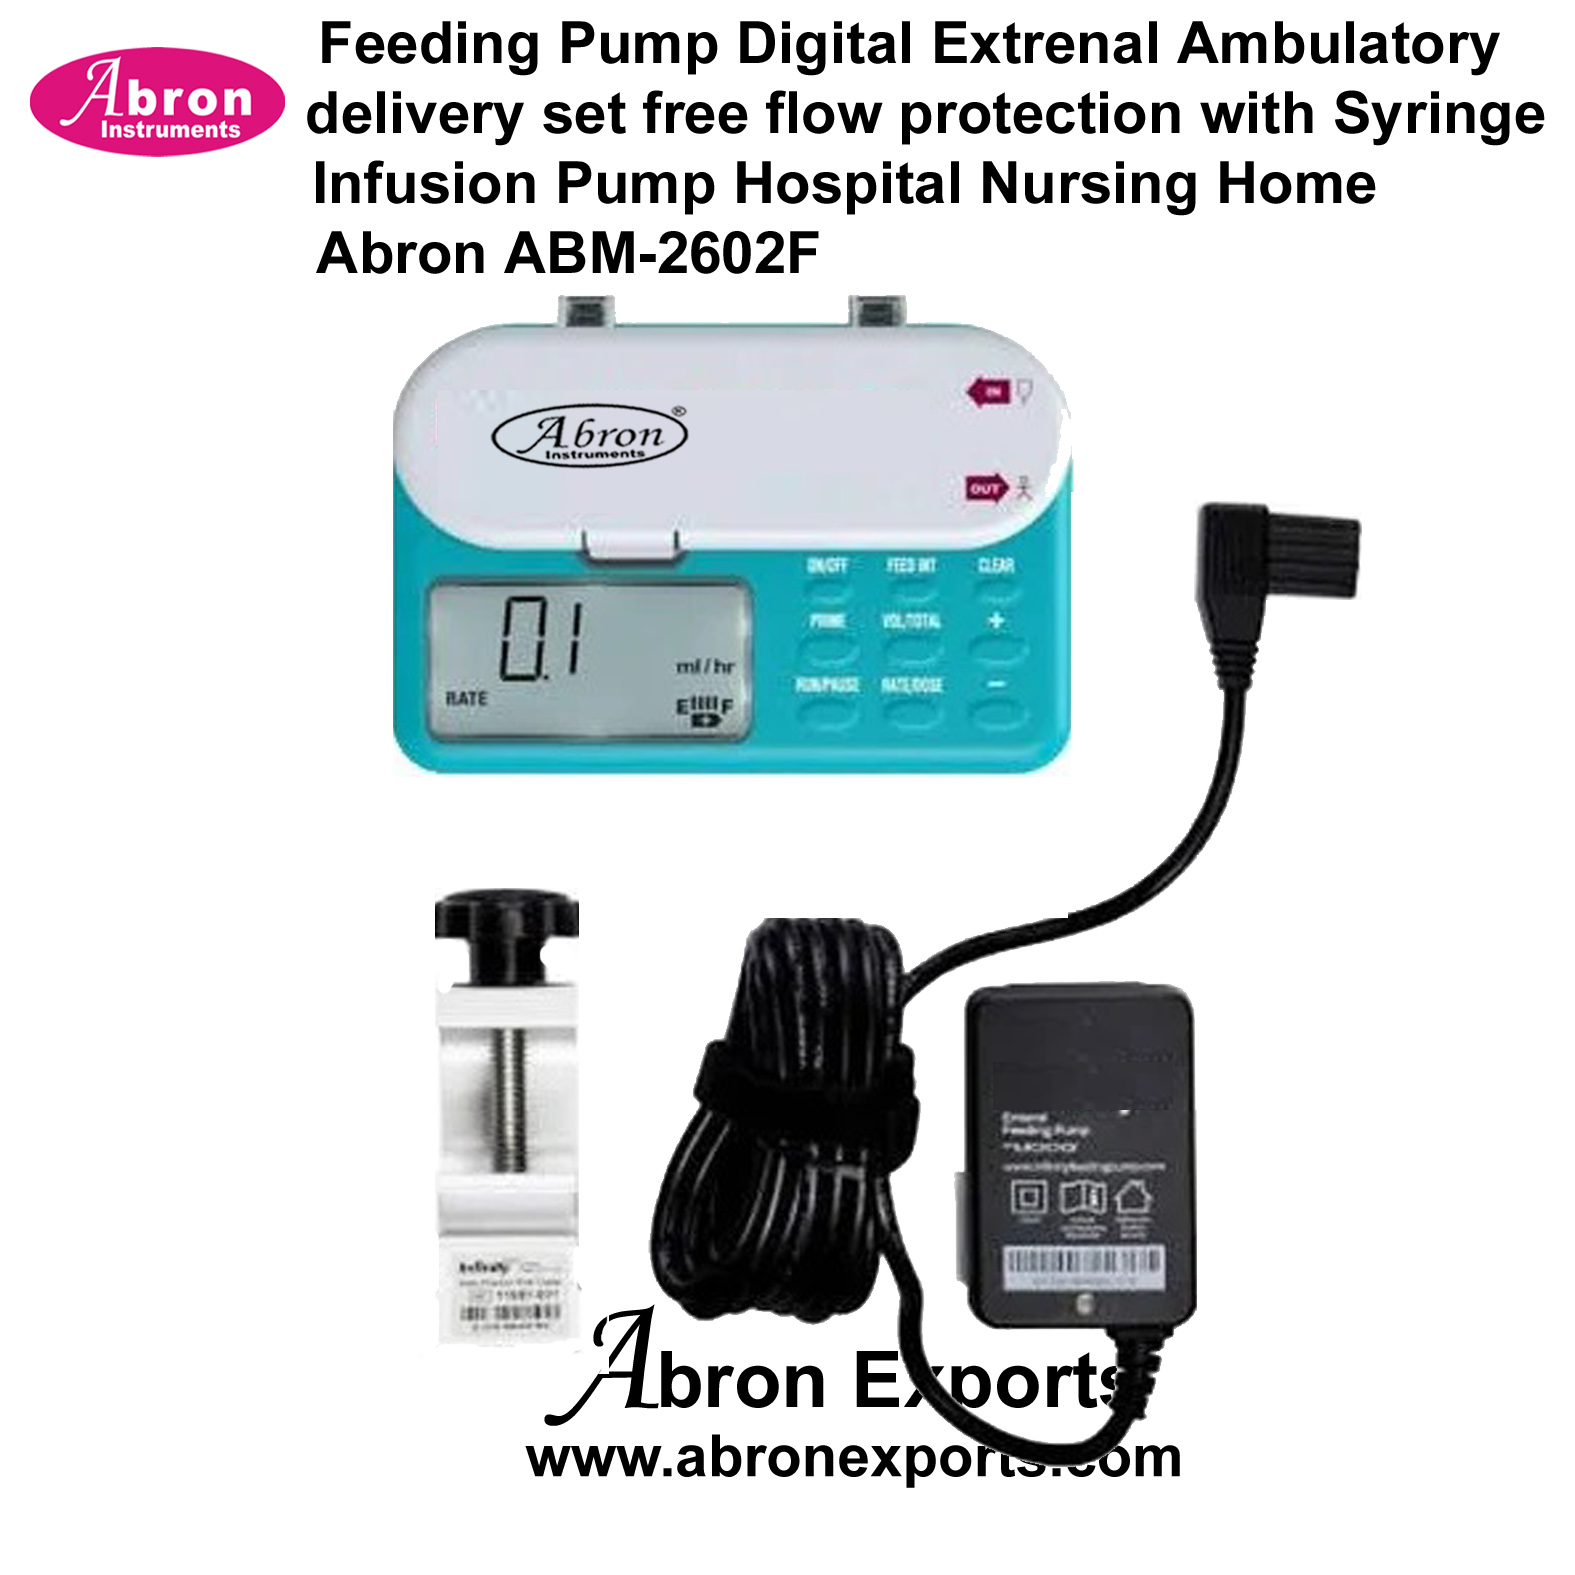 Feeding Pump Digital Extrenal Ambulatory delivery set free flow protection with Syringe Infusion Pump Hospital Nursing Home Abron ABM-2602F 